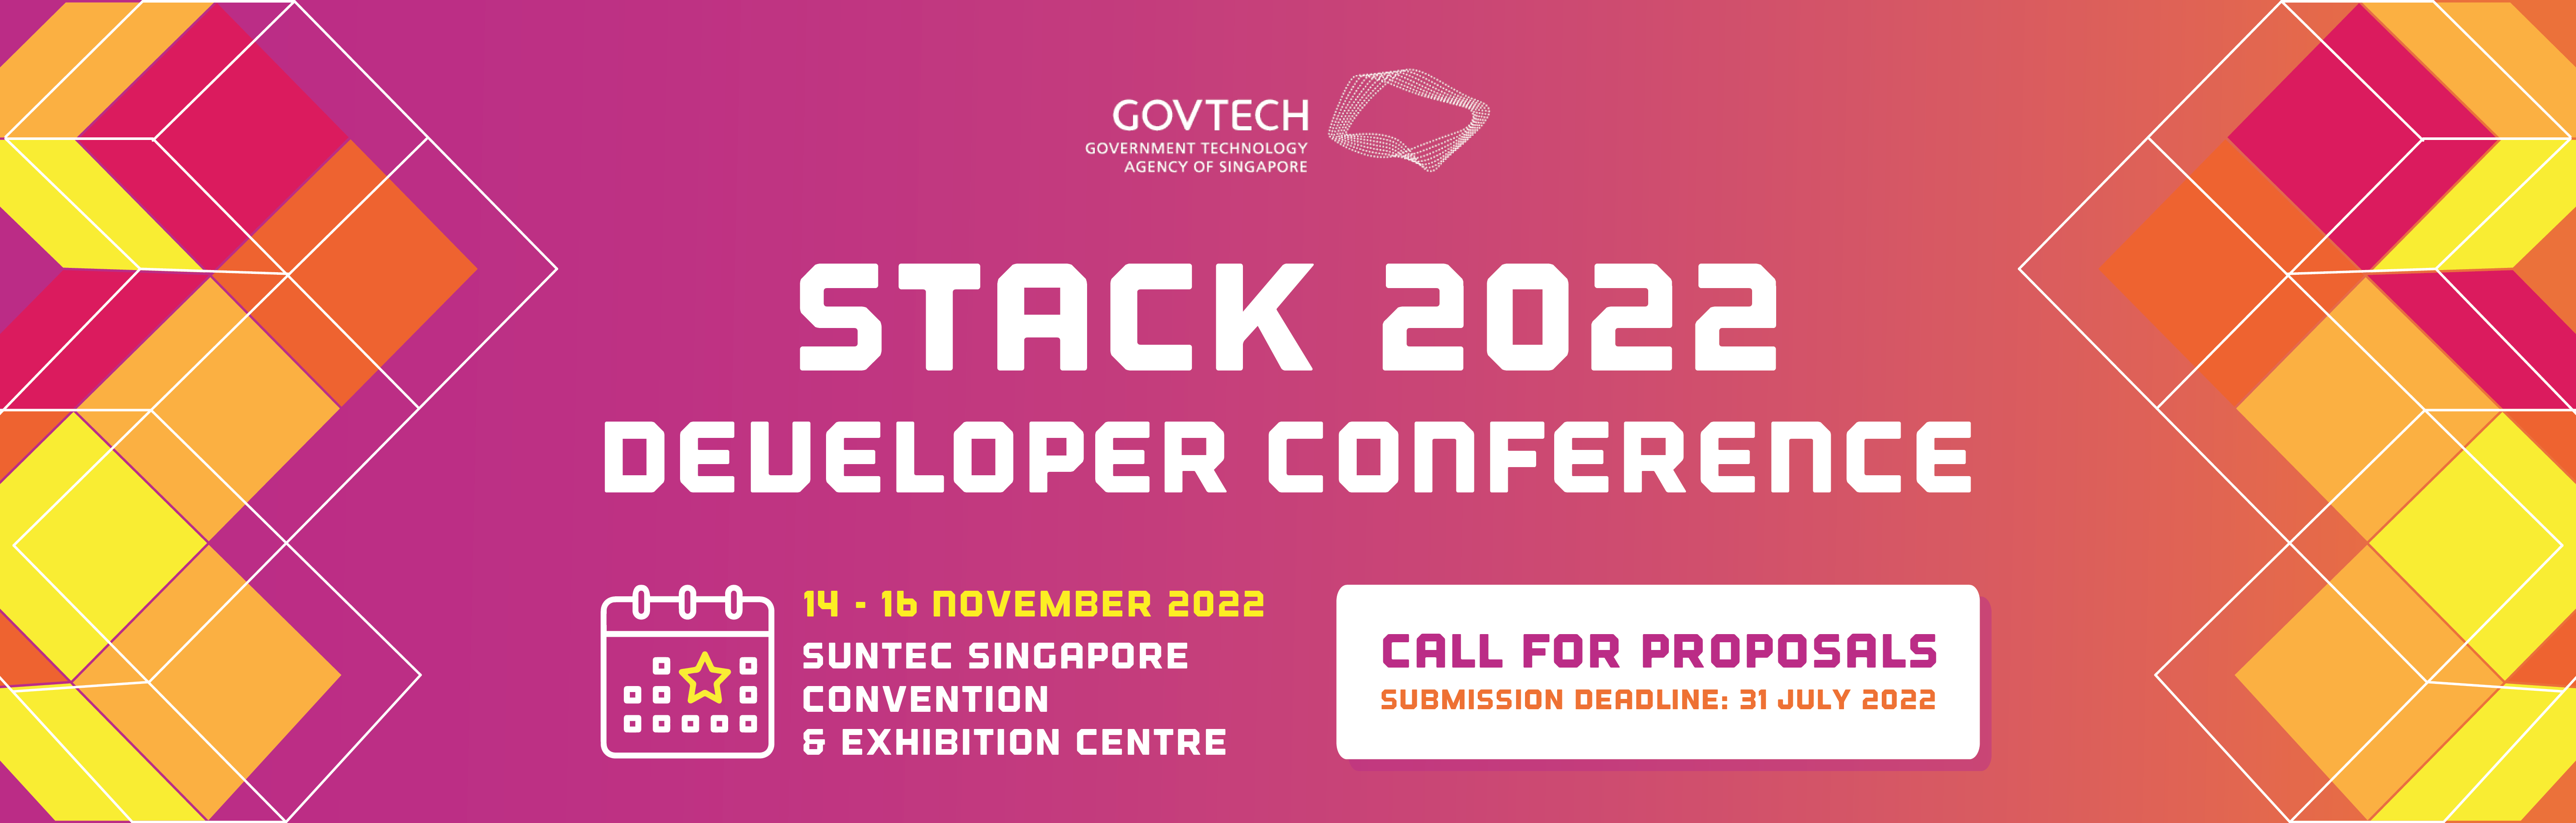 STACK 2022 Developer Conference - Call For Proposal